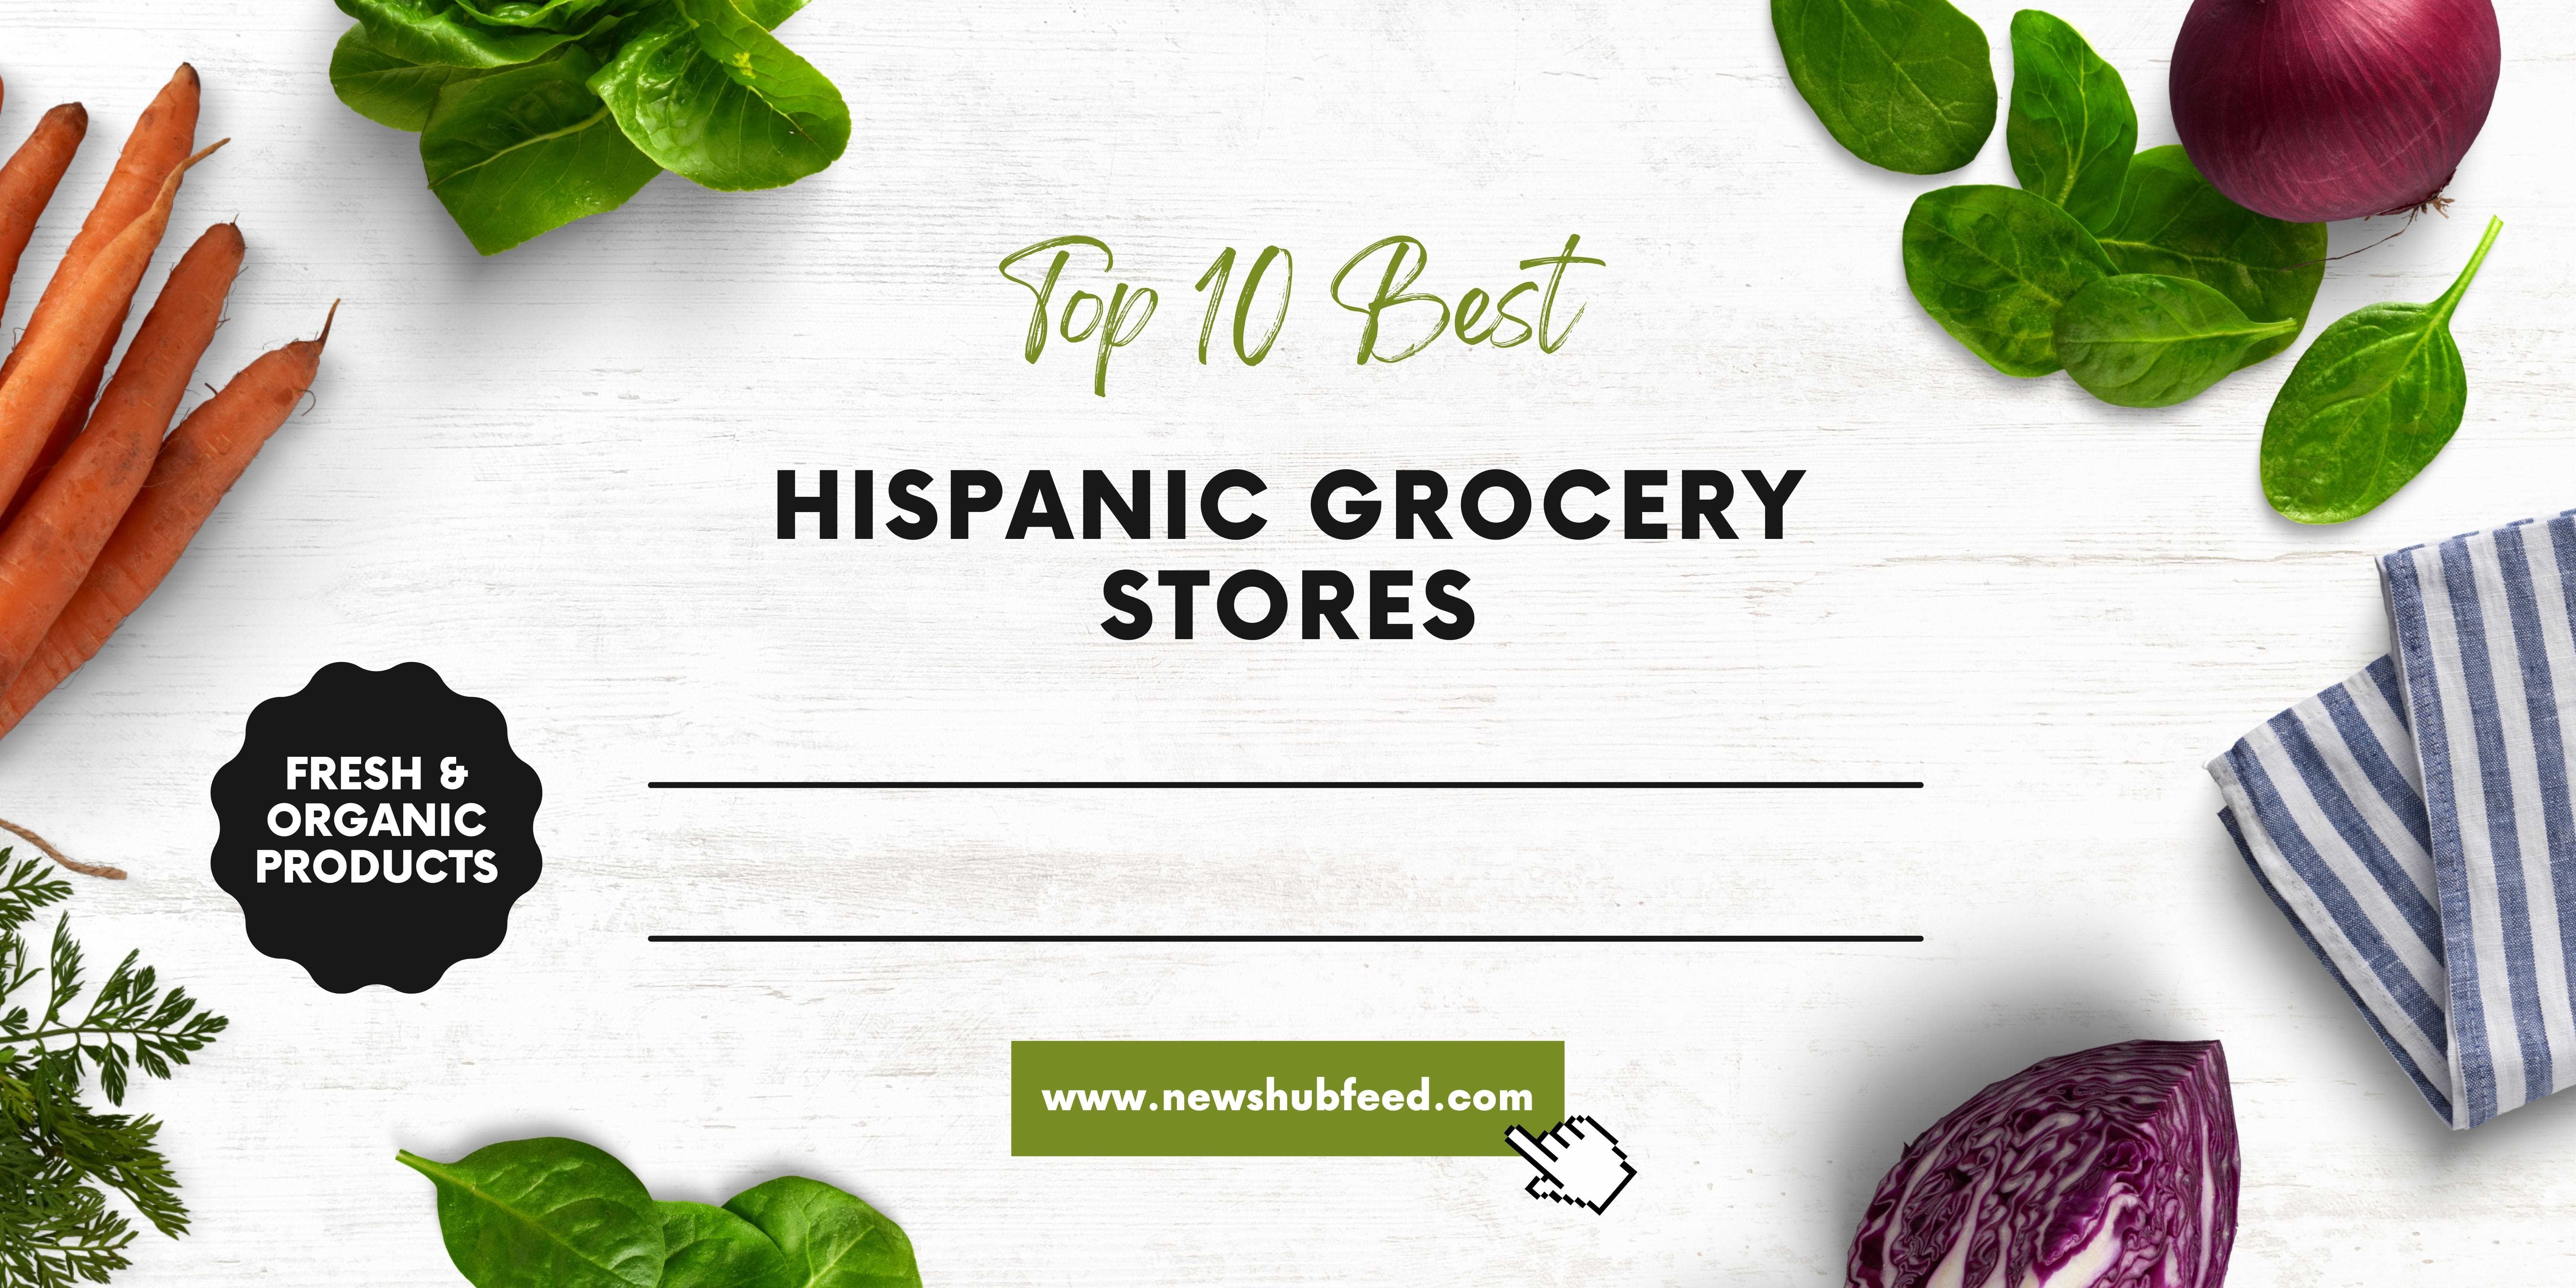 Top 10 Best Hispanic Grocery Stores